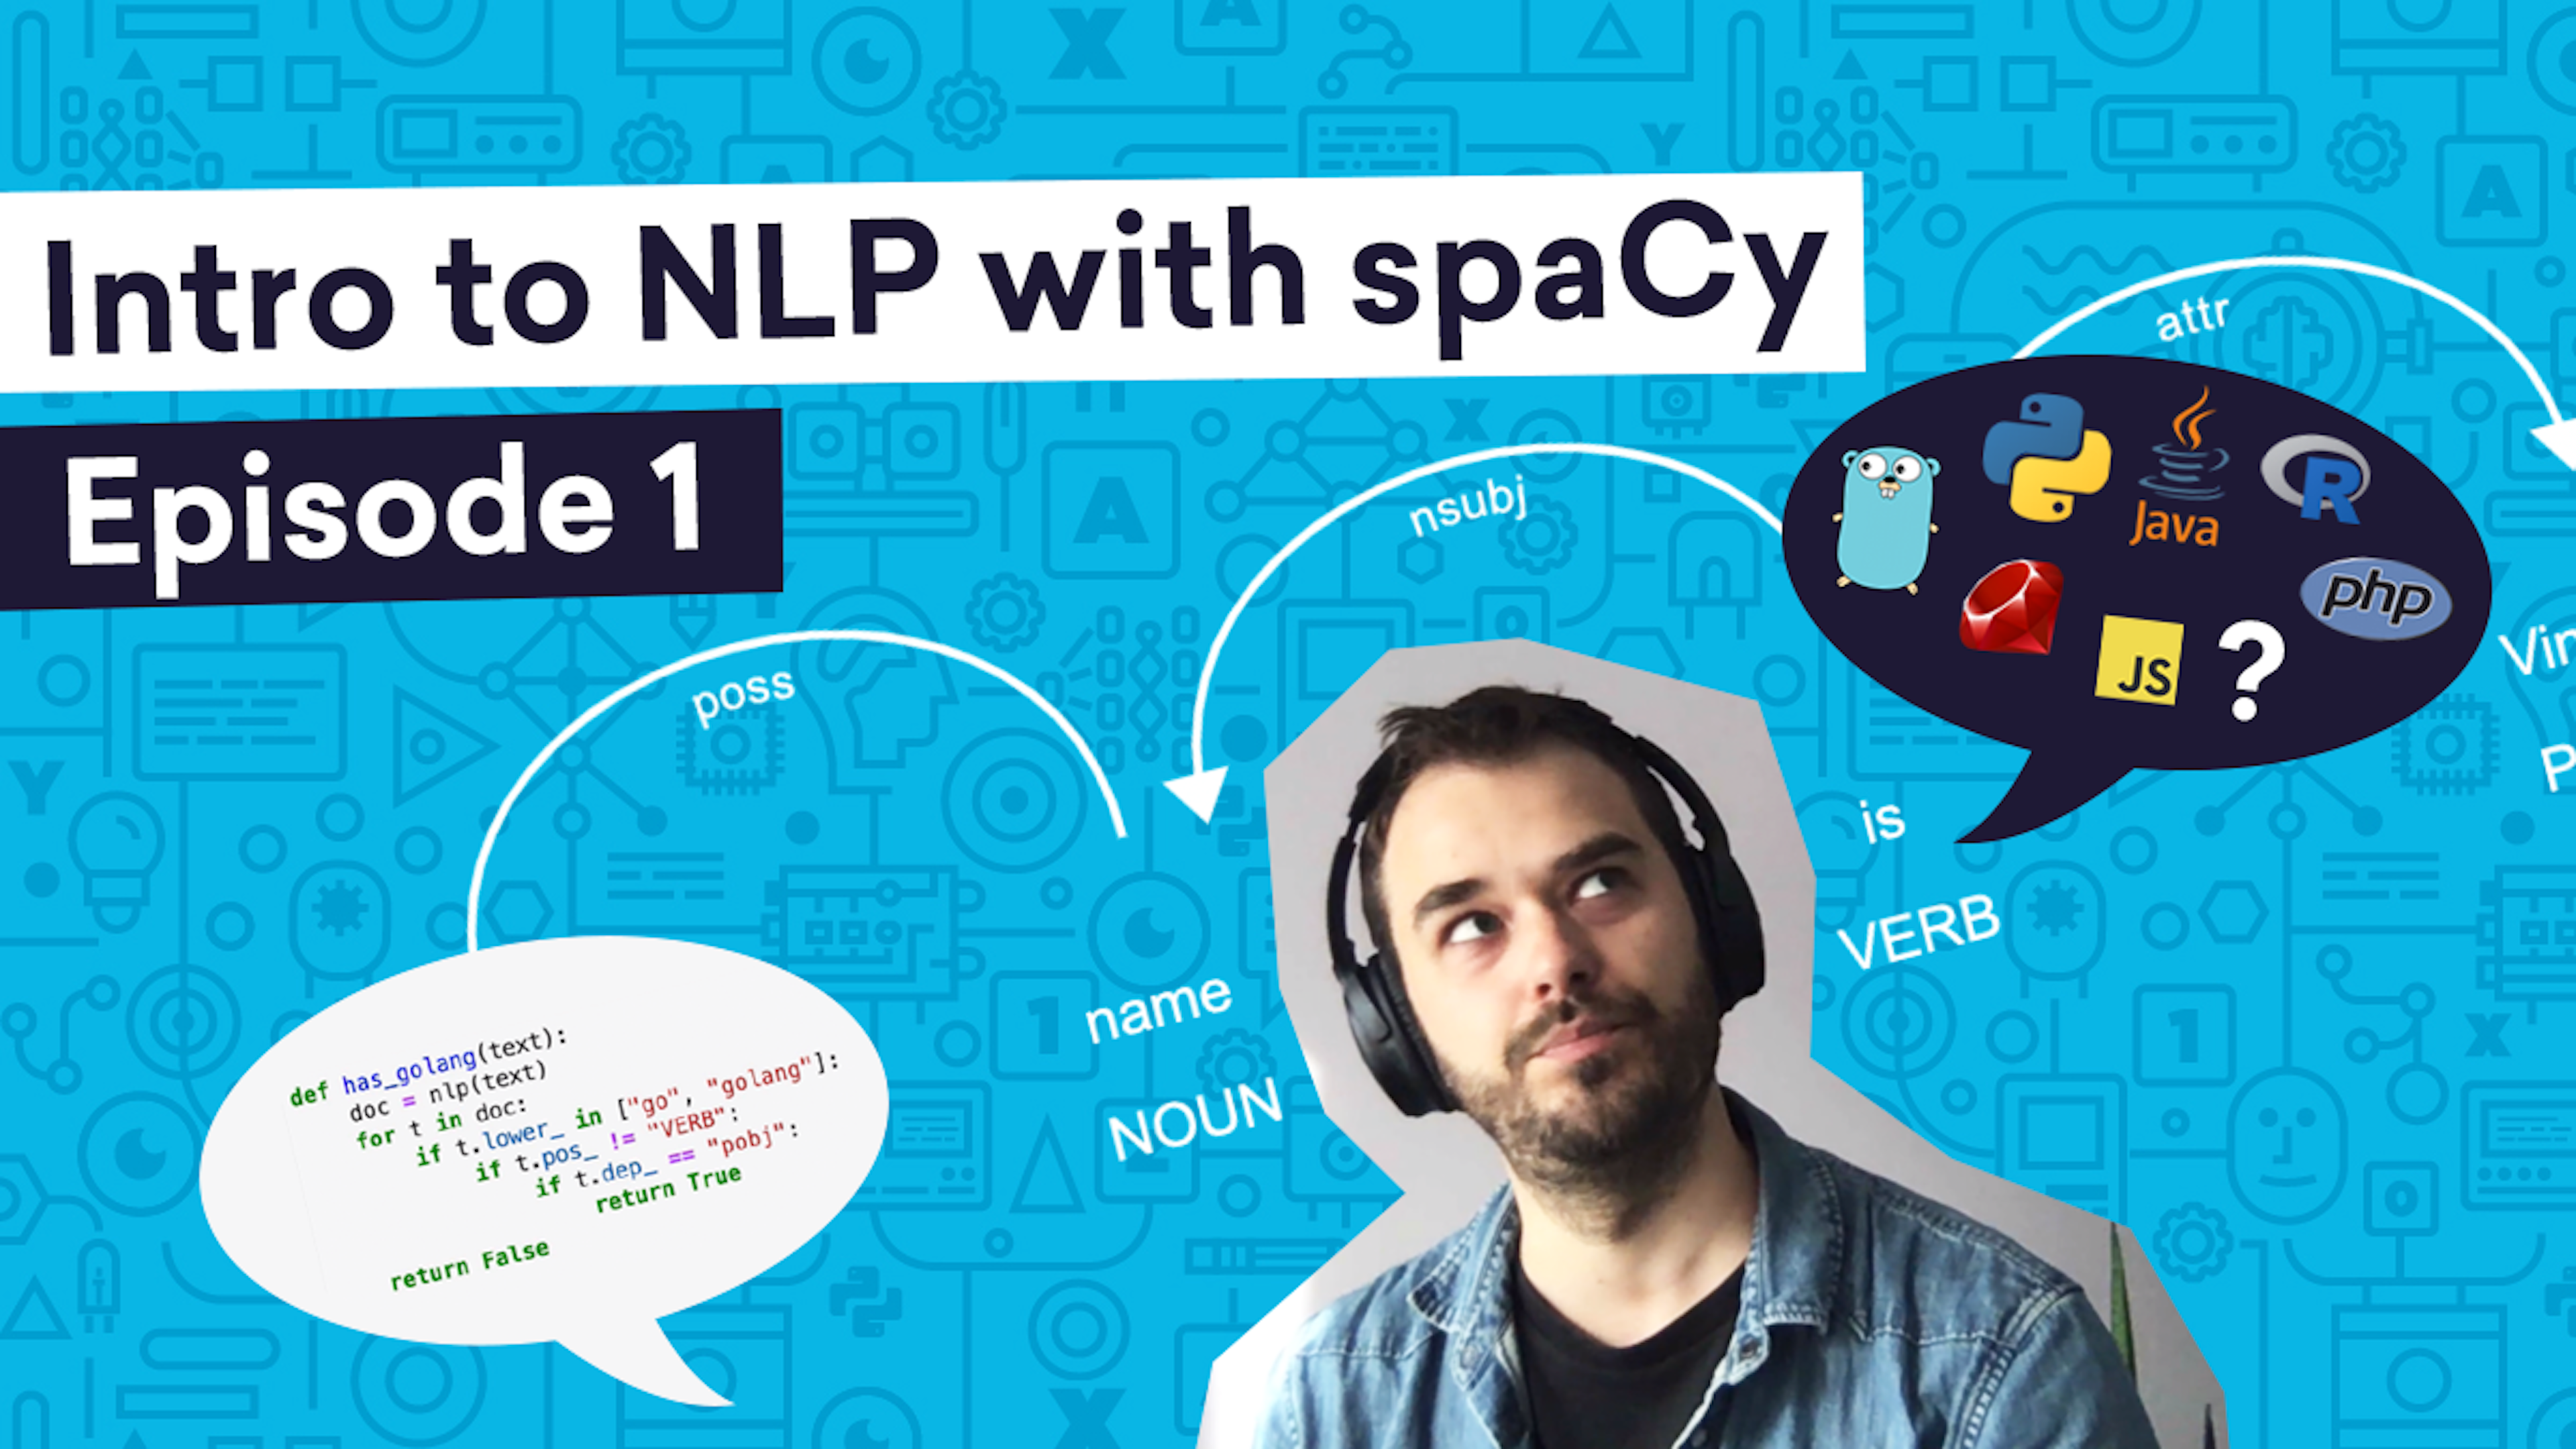 Intro to NLP with spaCy (1): Detecting programming languages